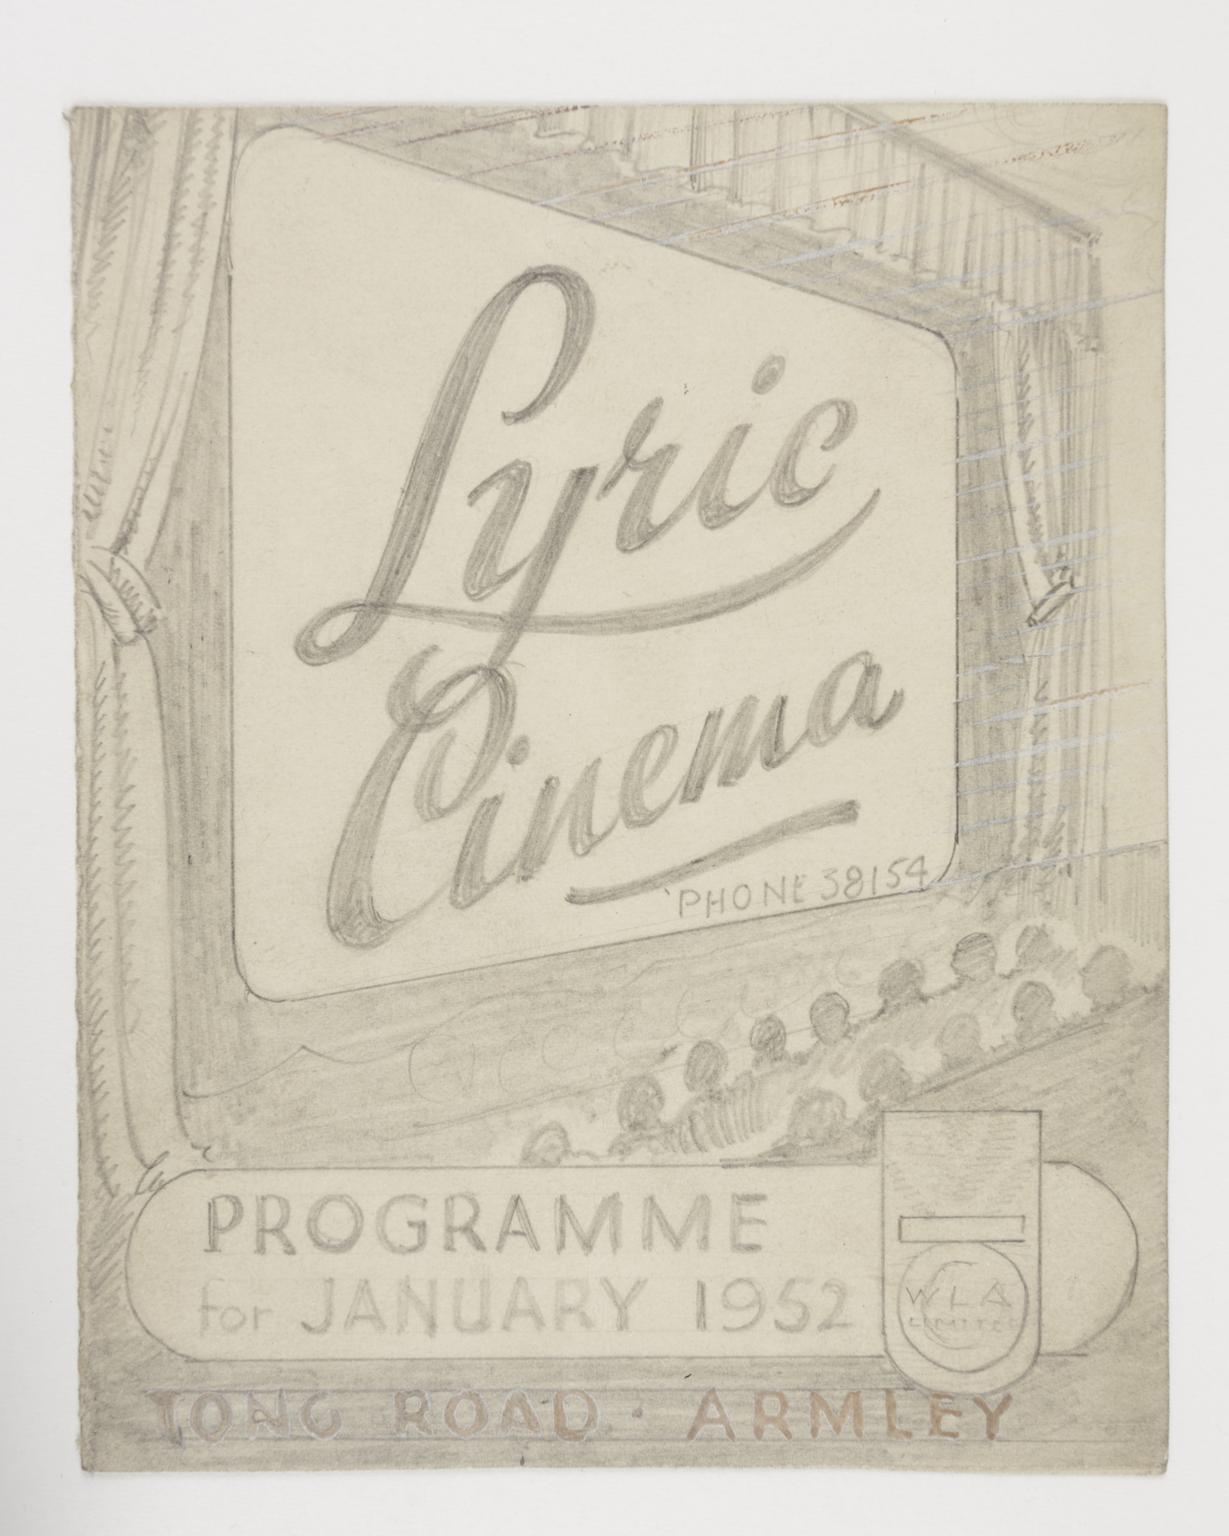 Pencil sketch for Lyric Cinema programme showing the screen and auditorium